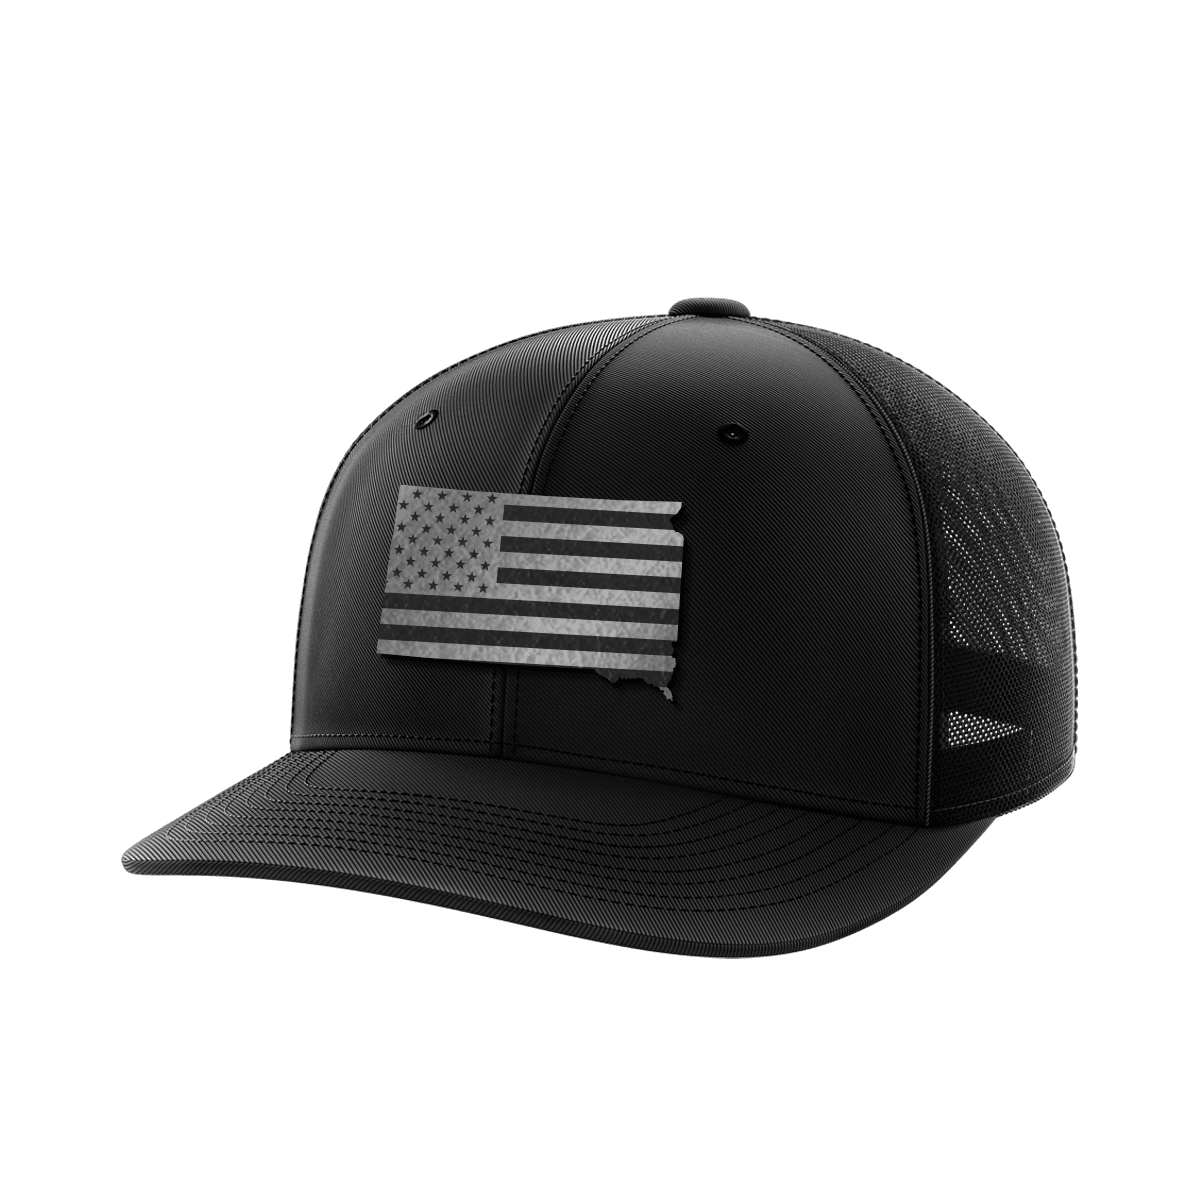 South Dakota United Collection (black leather) - Greater Half